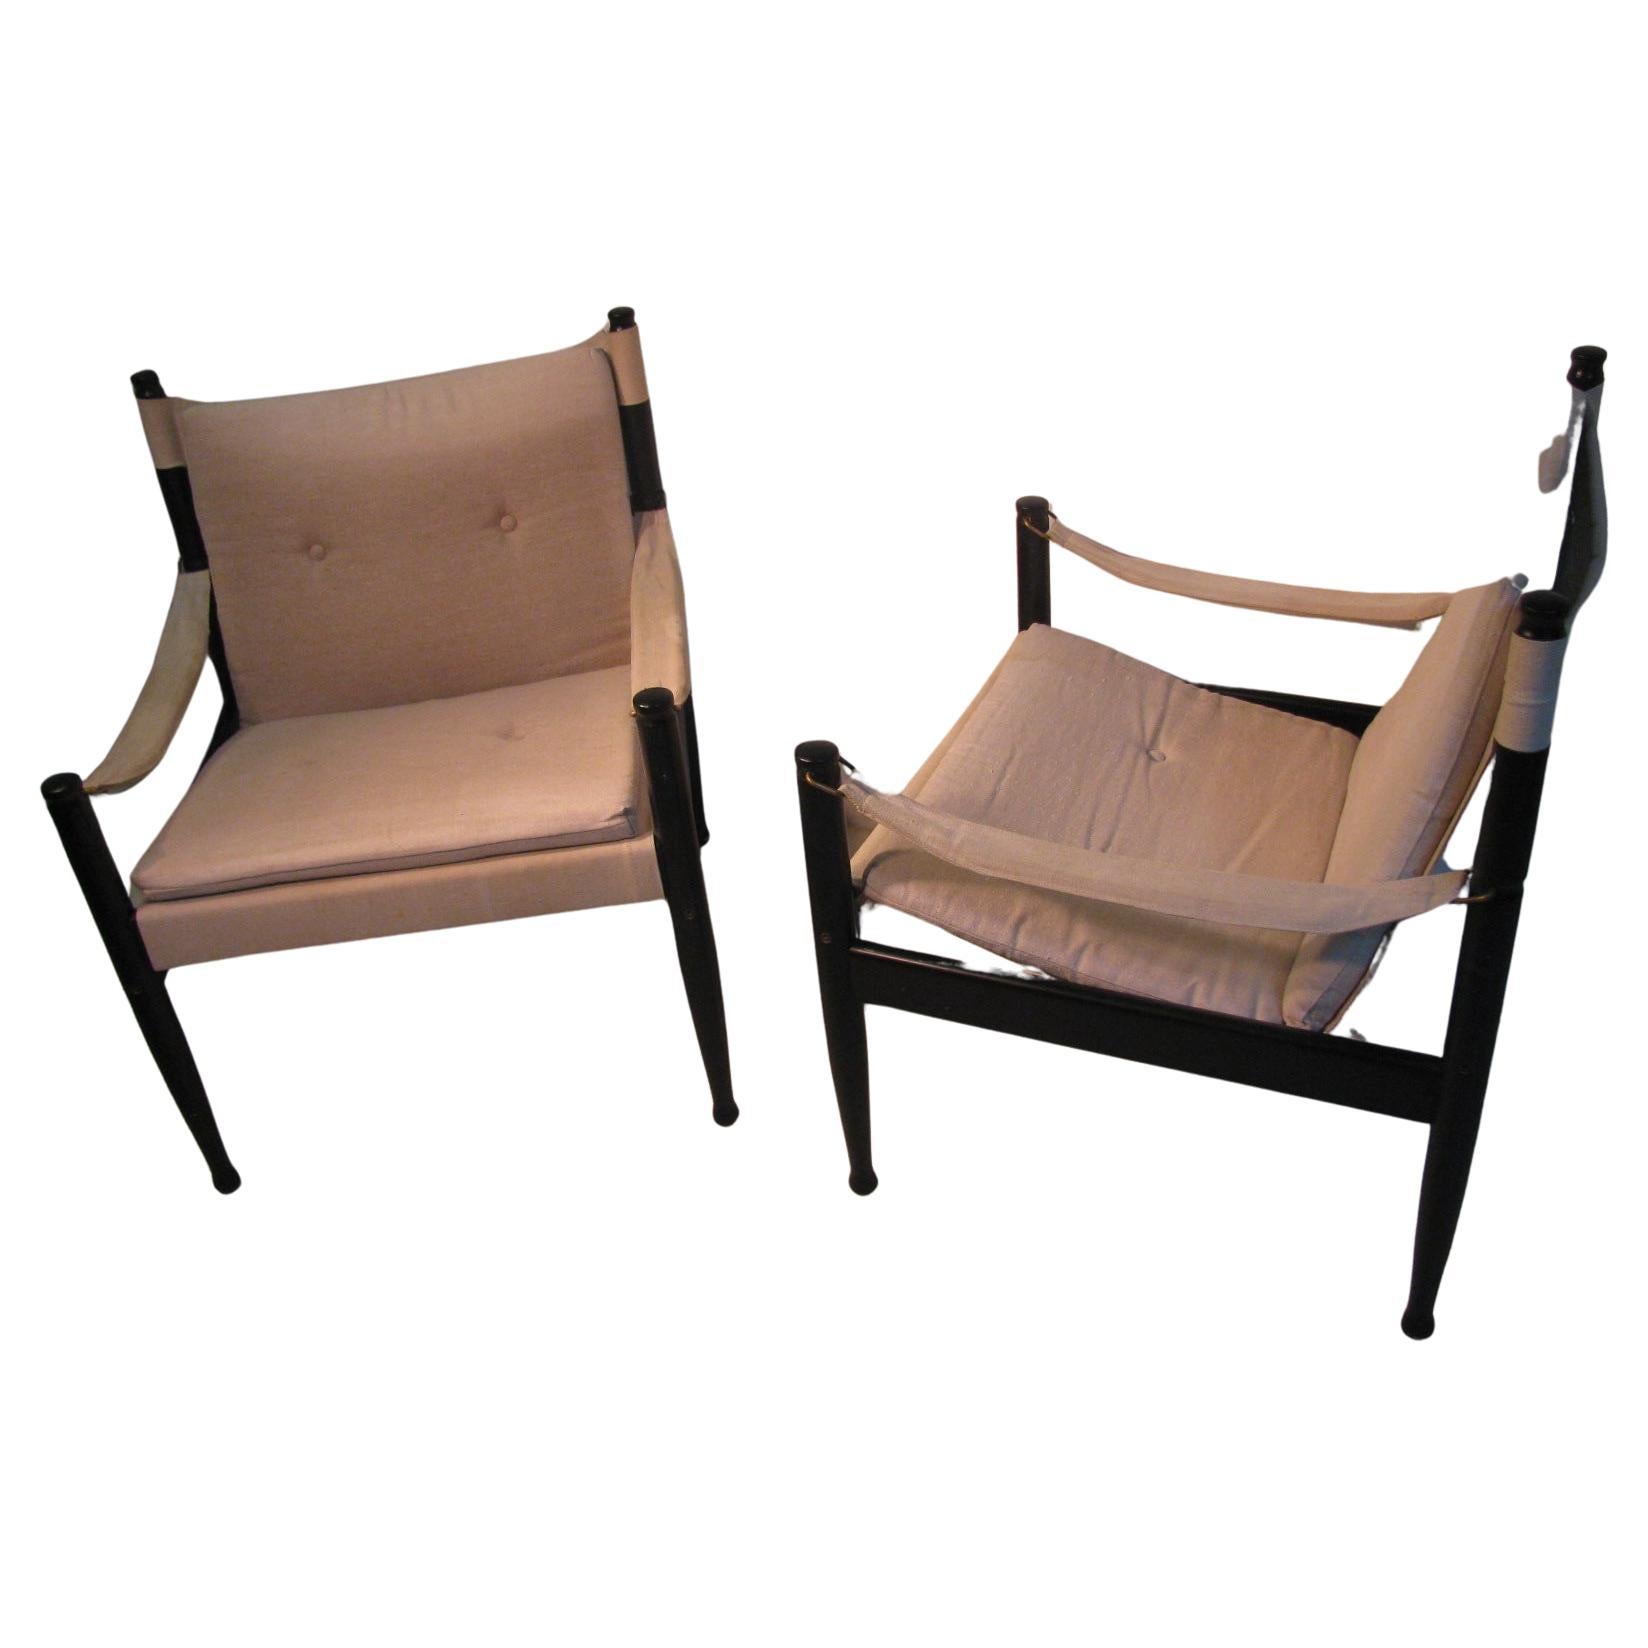 Mid-20th Century Pair of Mid-Century Modern Danish Safari Campaign Lounge Chairs by Erik Worts For Sale